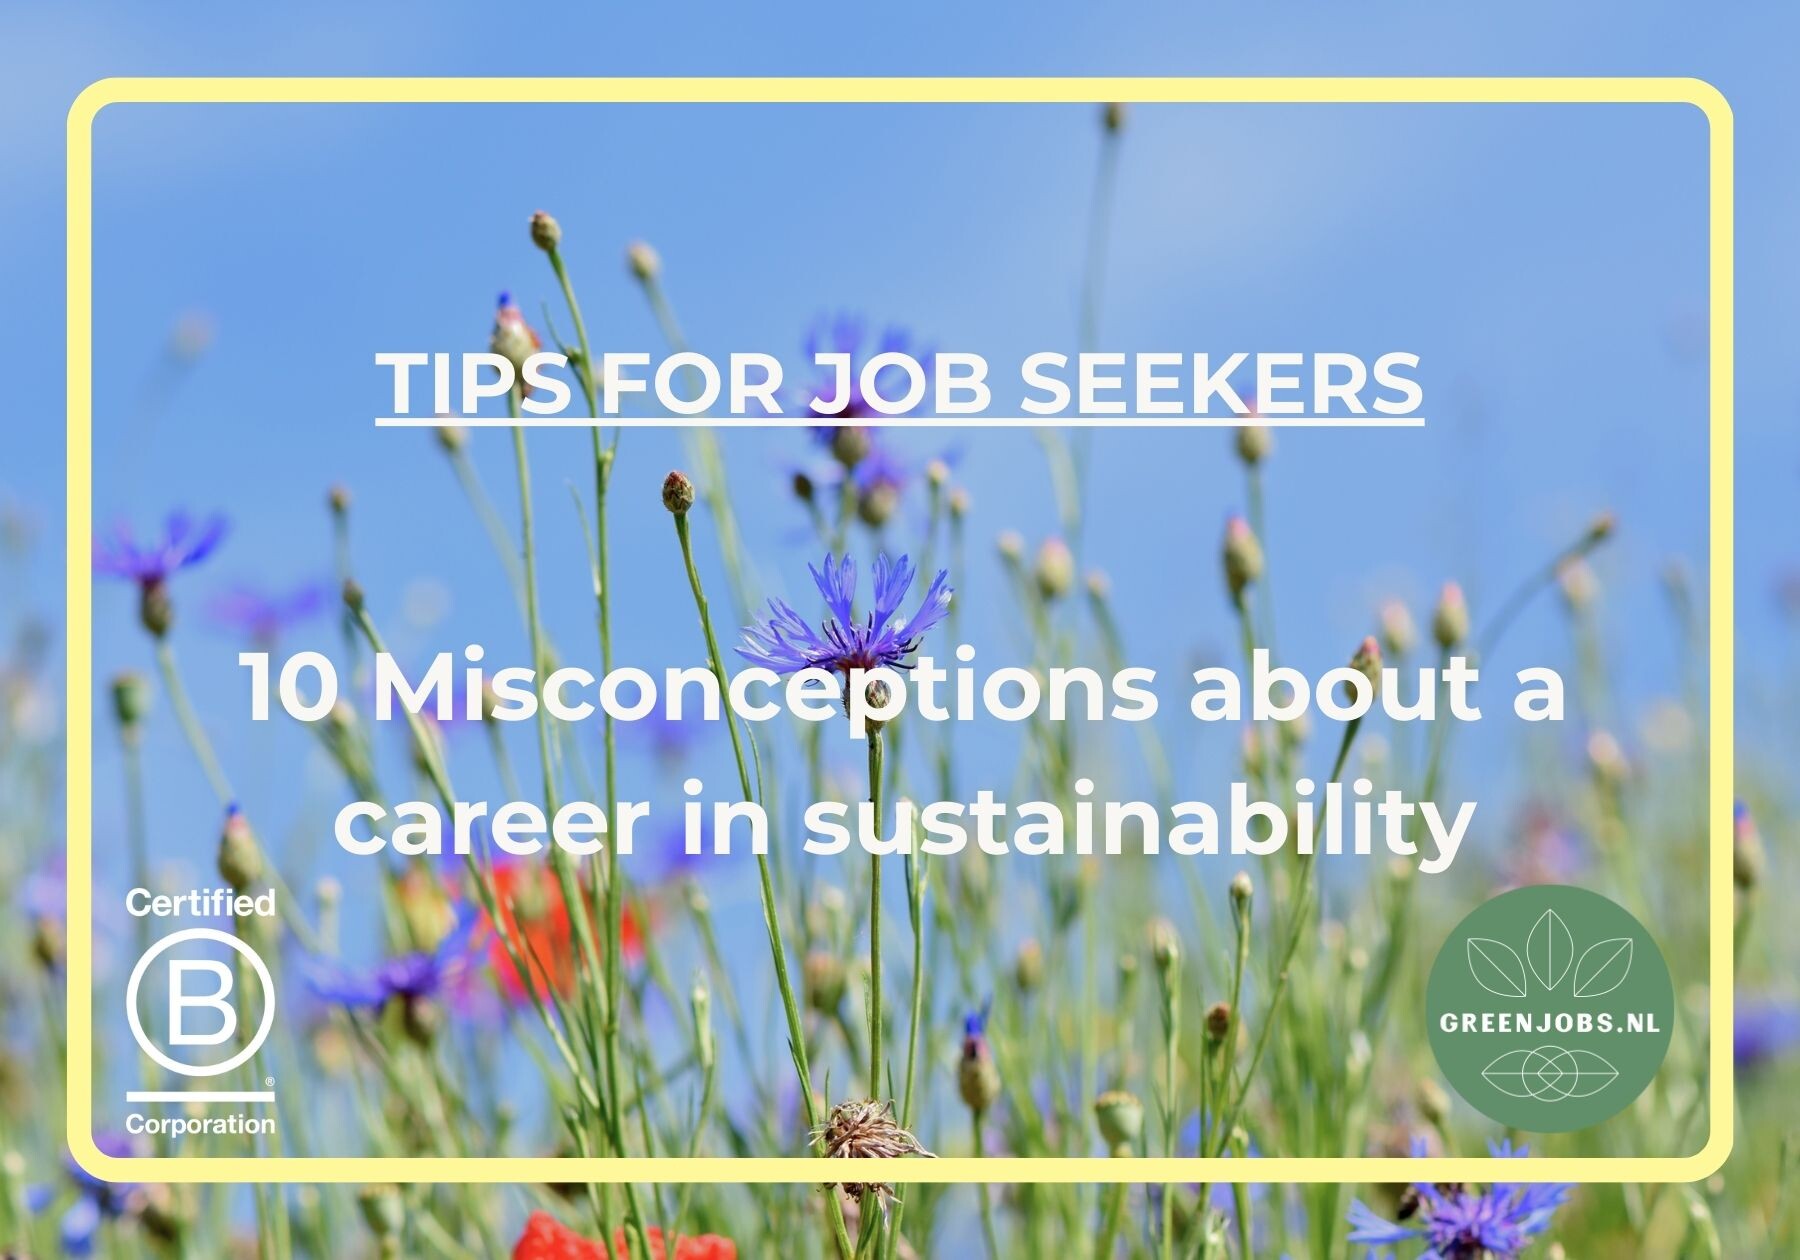 10 Misconceptions about a career in sustainability